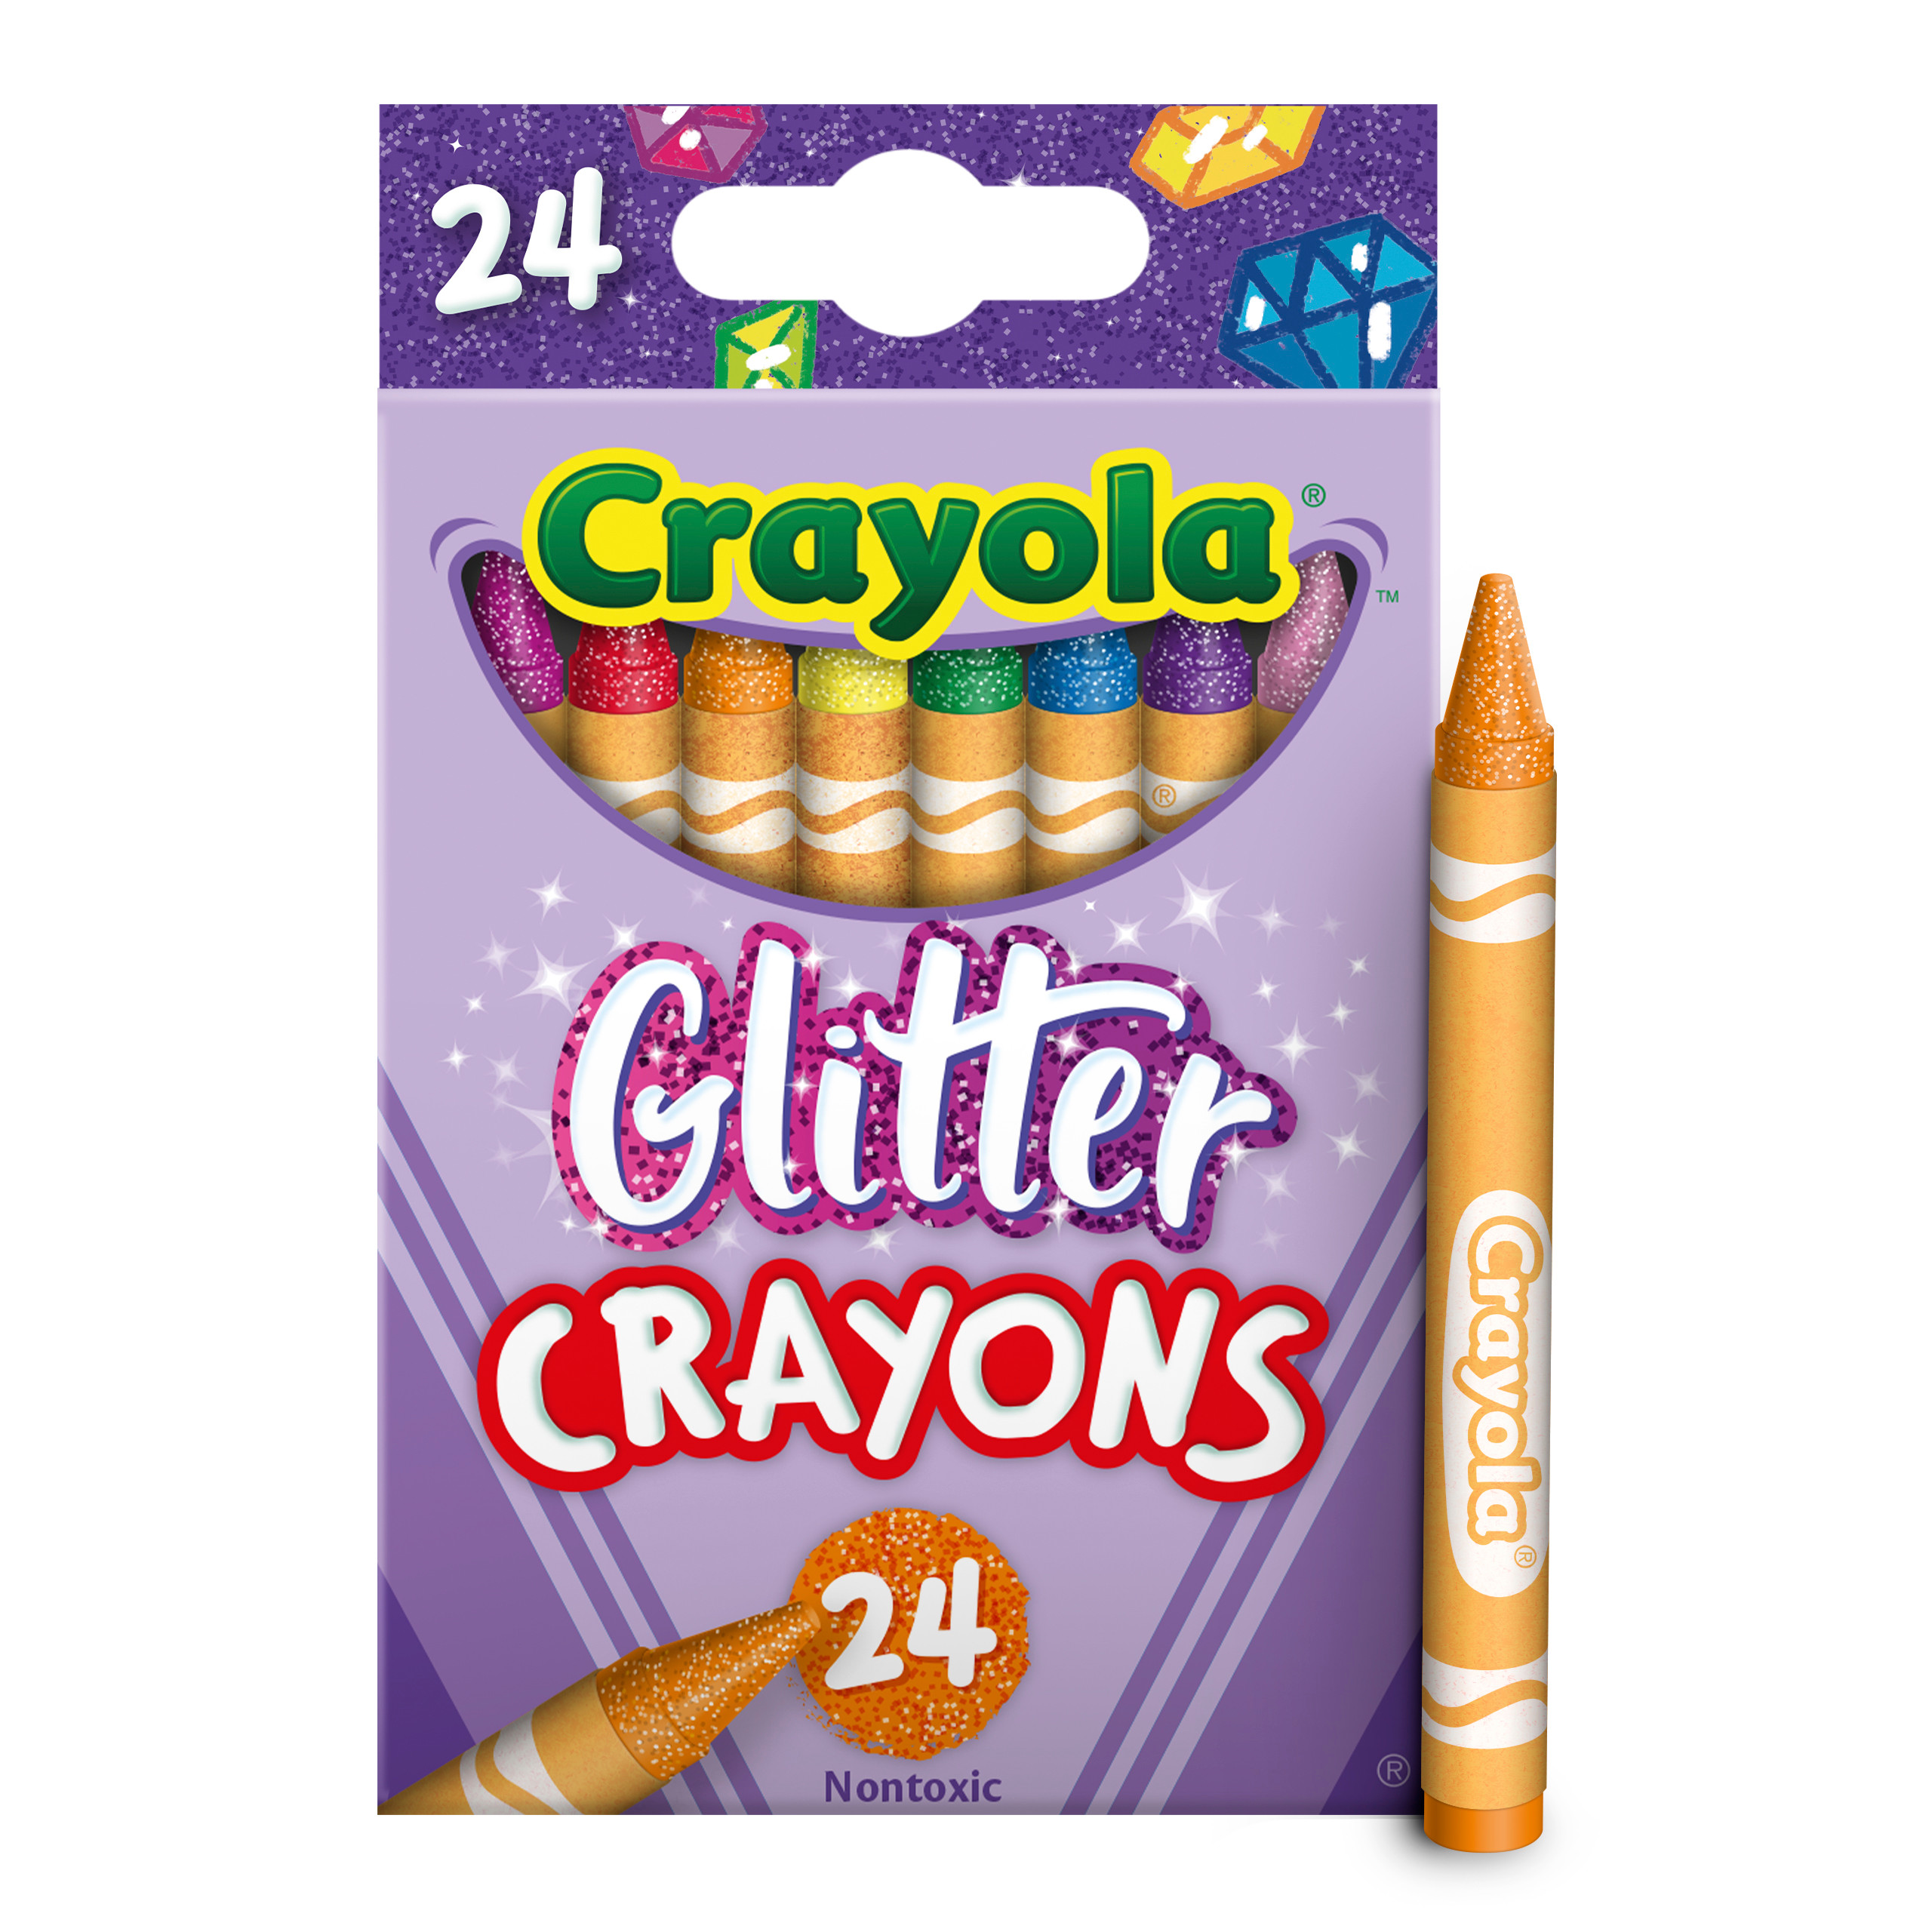 Crayola Glitter Crayons, Assorted Colors, Child, 24 Count - image 1 of 9